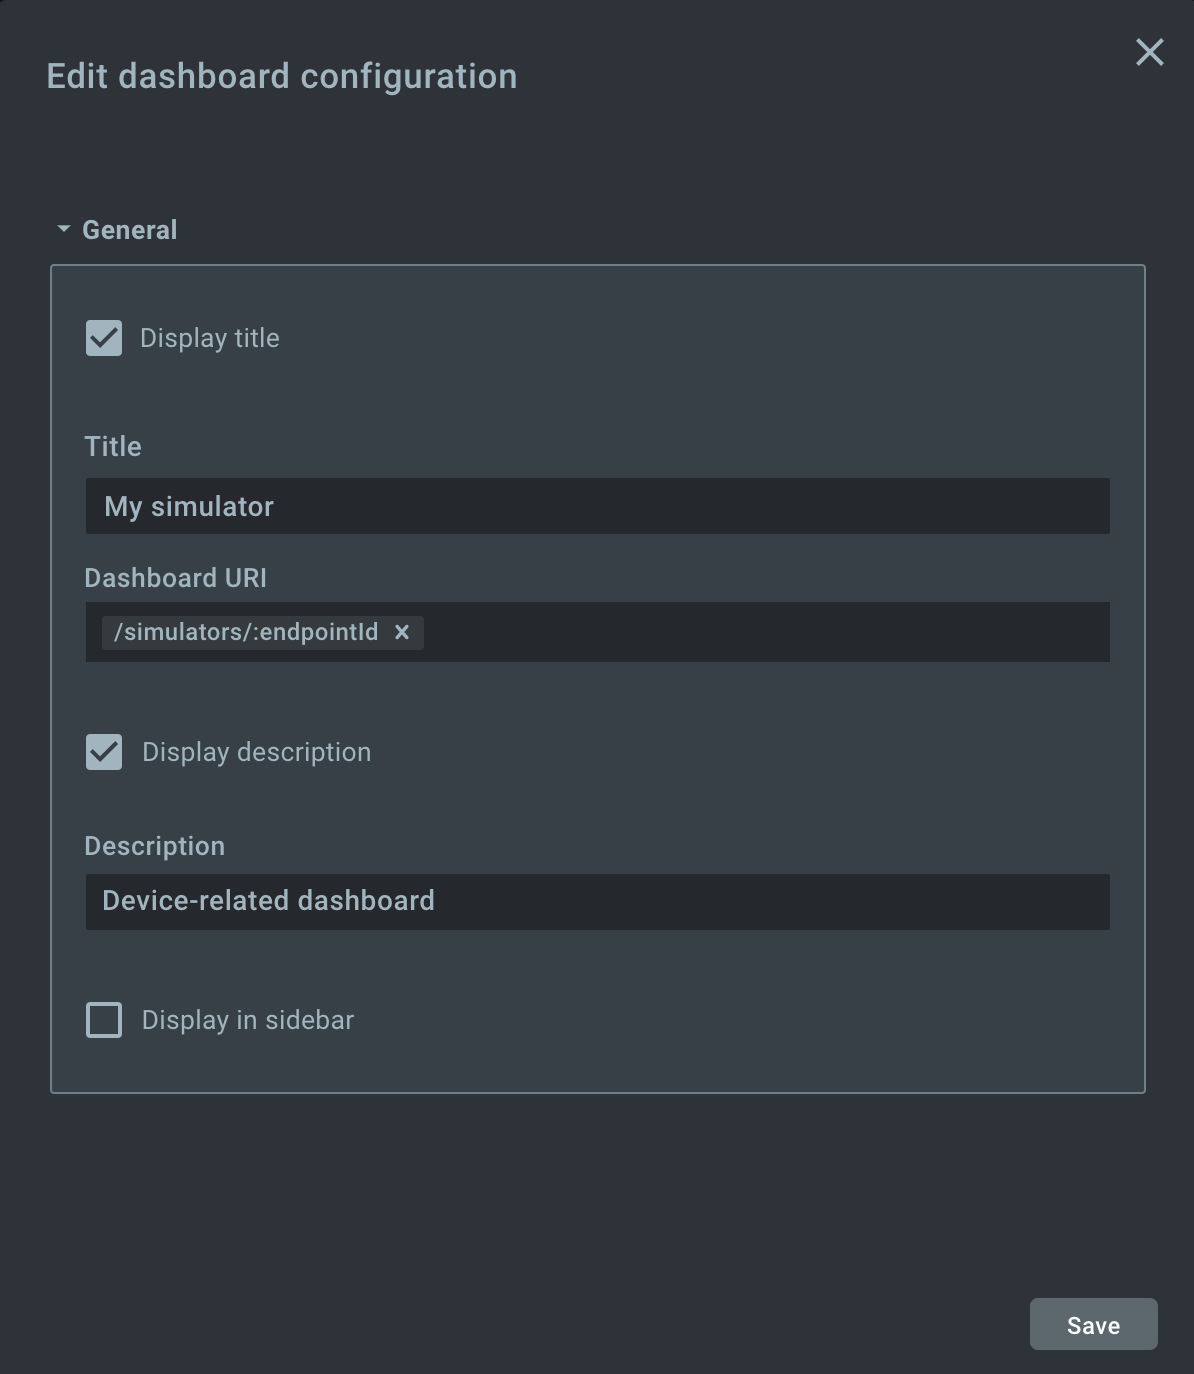 Add device-related dashboard form